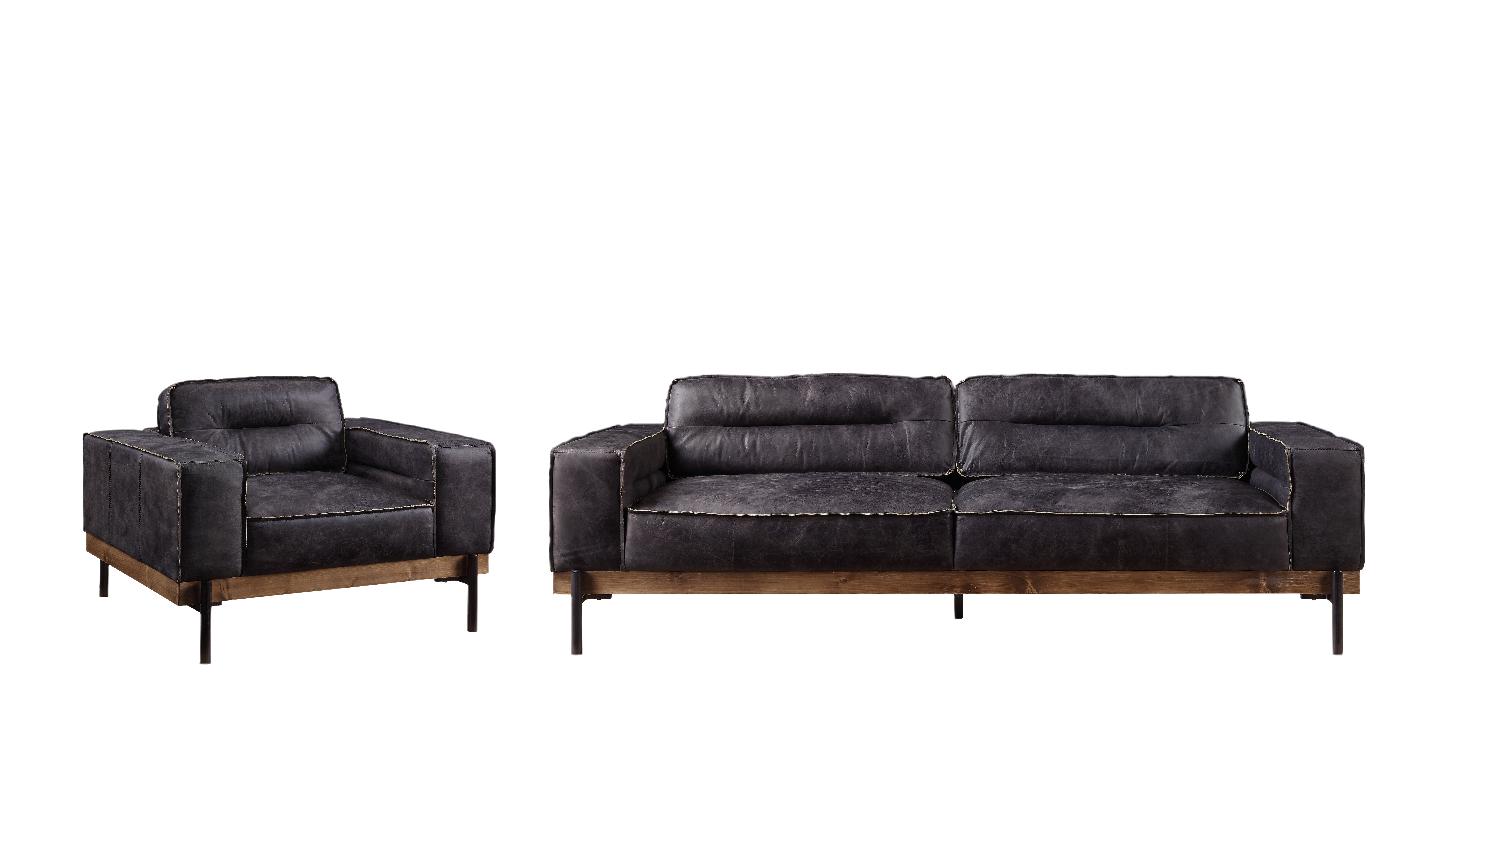 Contemporary Sofa and Chair Silchester 56505-2pcs in Ebony Top grain leather